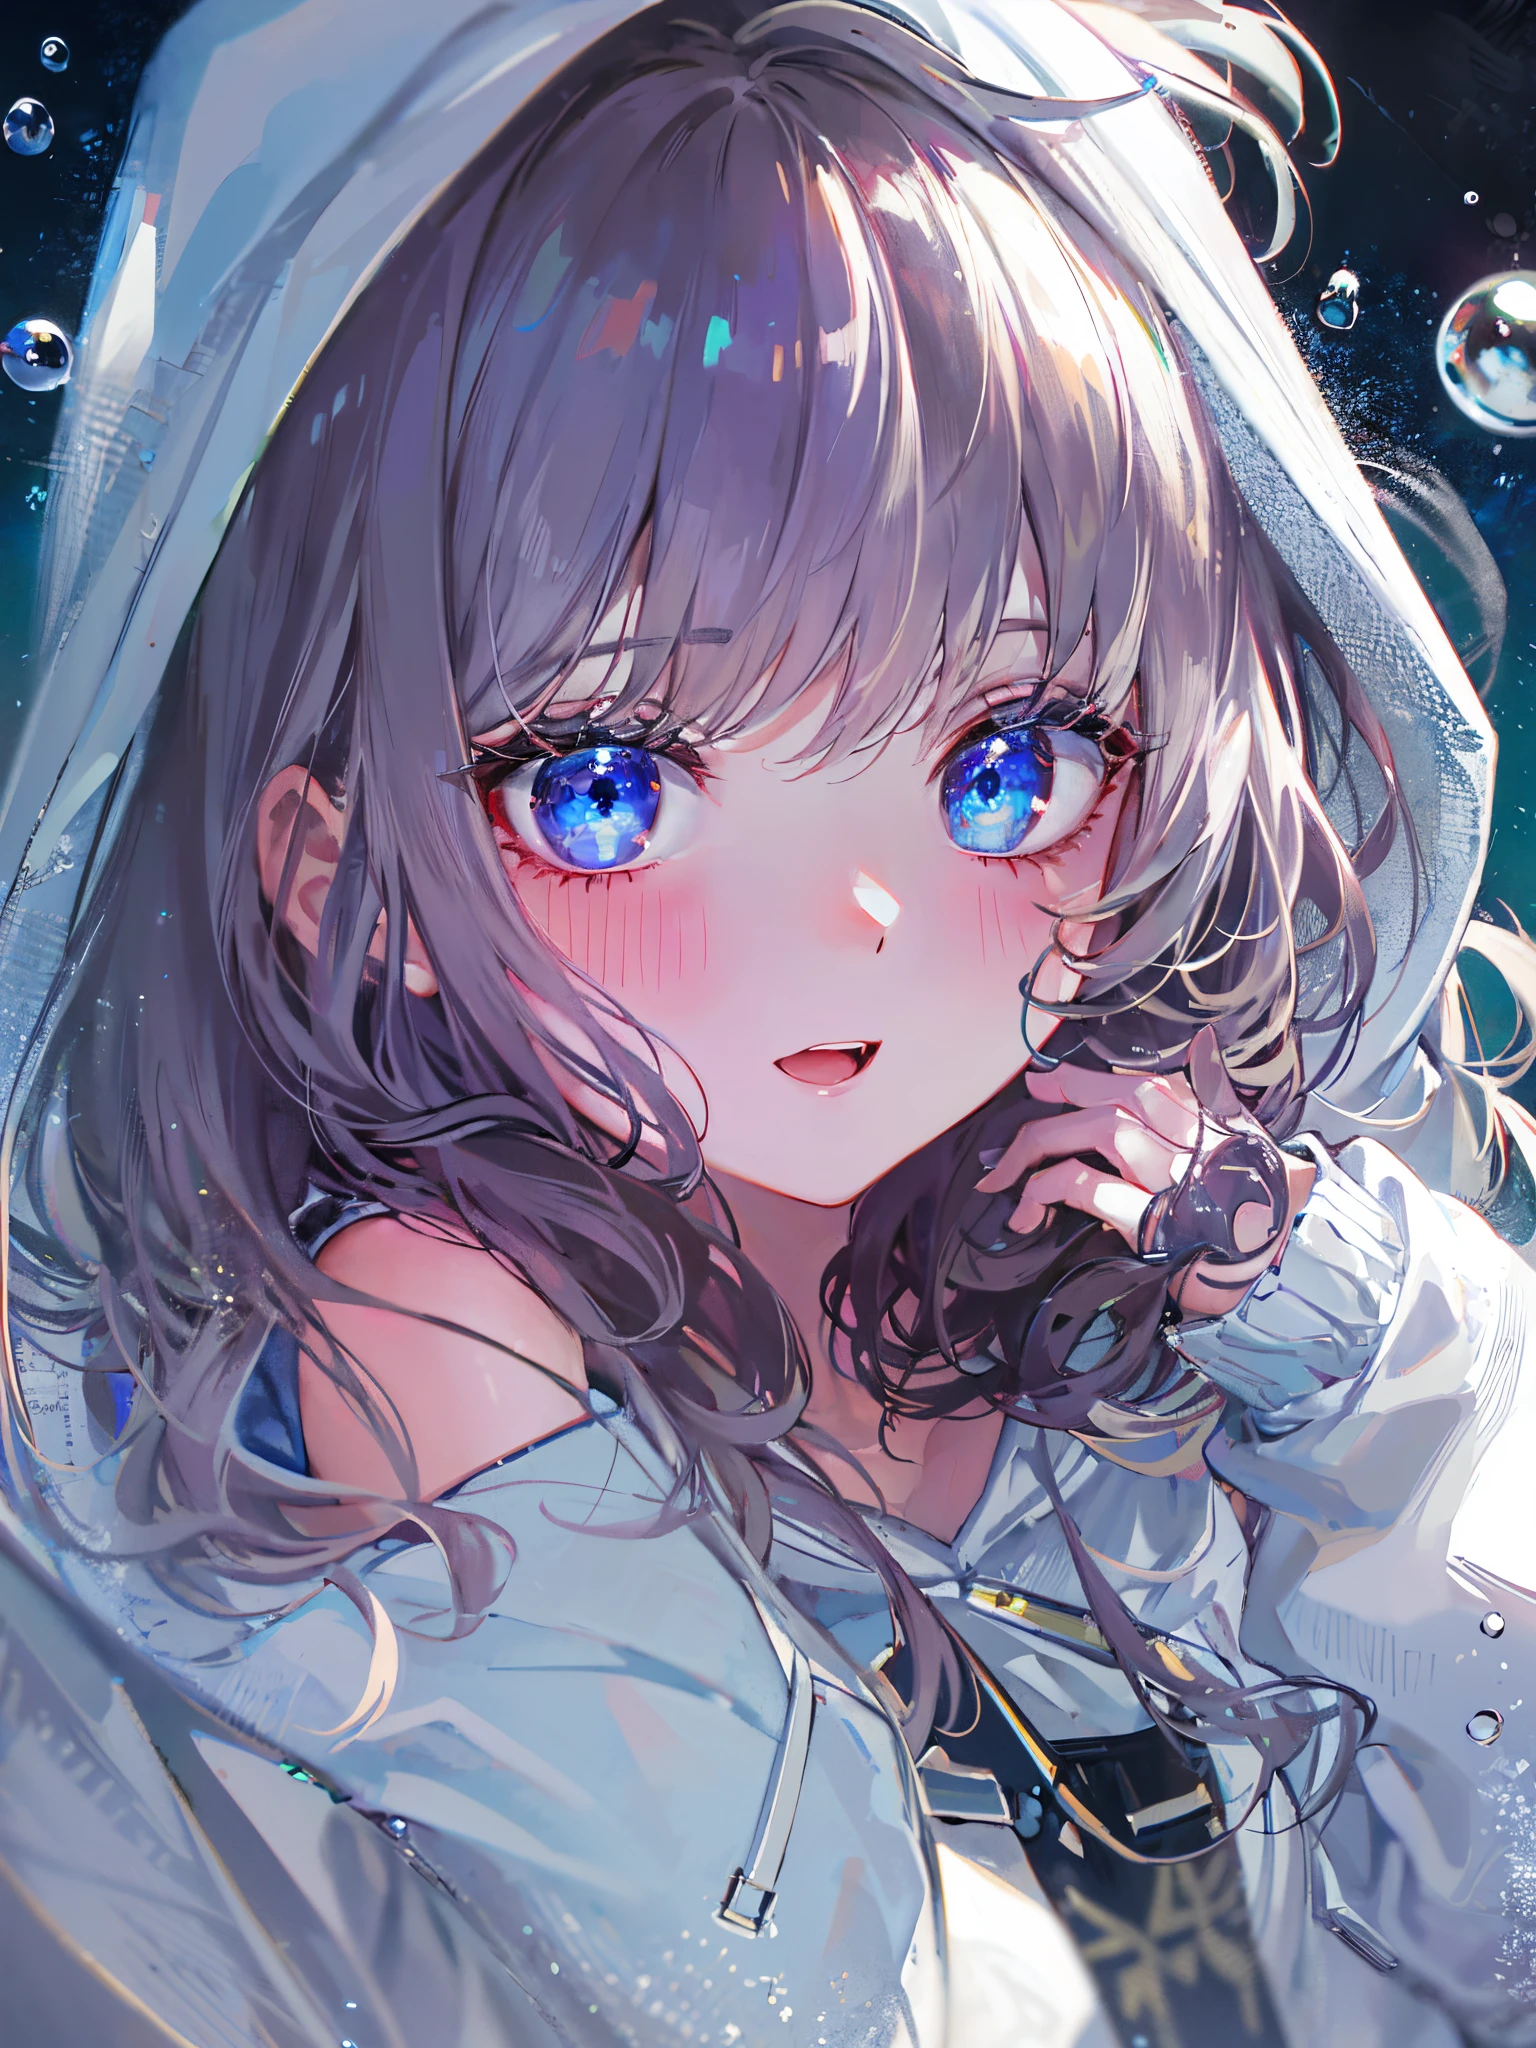 ((top-quality)), ((​masterpiece)), ((Ultra-detail)), (Extremely delicate and beautiful), girl with, solo, cold attitude,((White hoodie)),She is very(relax)with  the(Settled down)Looks,depth of fields,Evil smile,Bubble, under the water, Air bubble,Underwater world bright light blue eyes,inner color with bright gray hair and light blue tips,,,,,,,,,,,,,,,,,,,,,Cold background,Bob Hair - Linear Art, shortpants、knee high socks、White uniform like 、Light blue ribbon ties、Clothes are sheer、Hands in pockets、Bright eyes like sapphire,Fronllesse Blue, A small blue light was floating、fantastic eyes、selfy,Self-shot、The bangs fall over the eyes, giving a sexy impression.